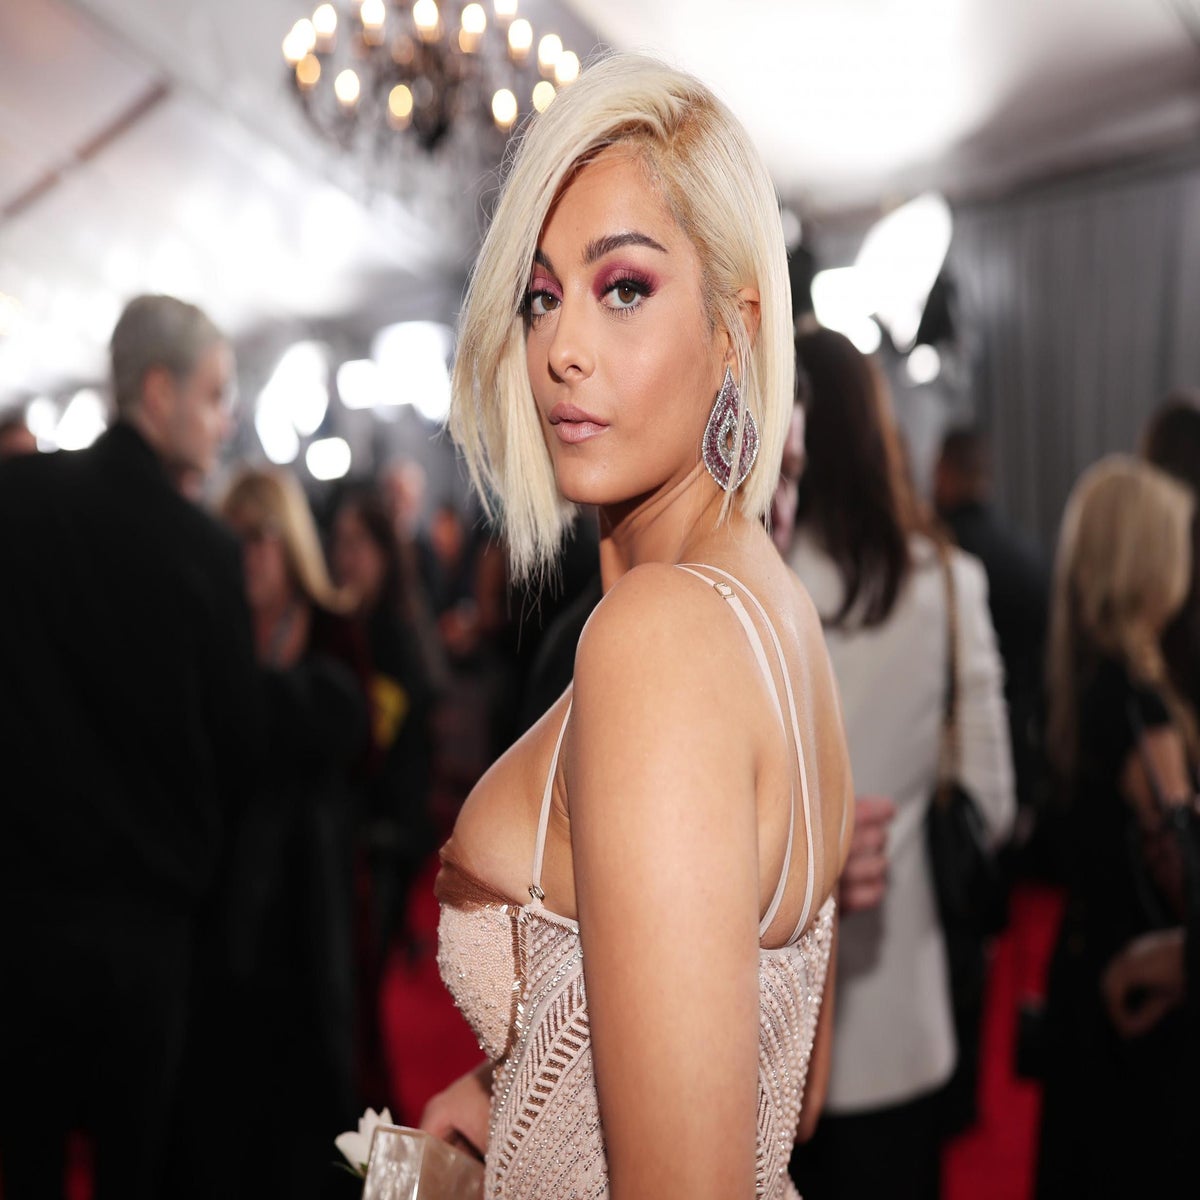 Xxx Nudes Bebe Rexba - Bebe Rexha says she felt like she was 'going to get raped' one night in  recording studio | The Independent | The Independent